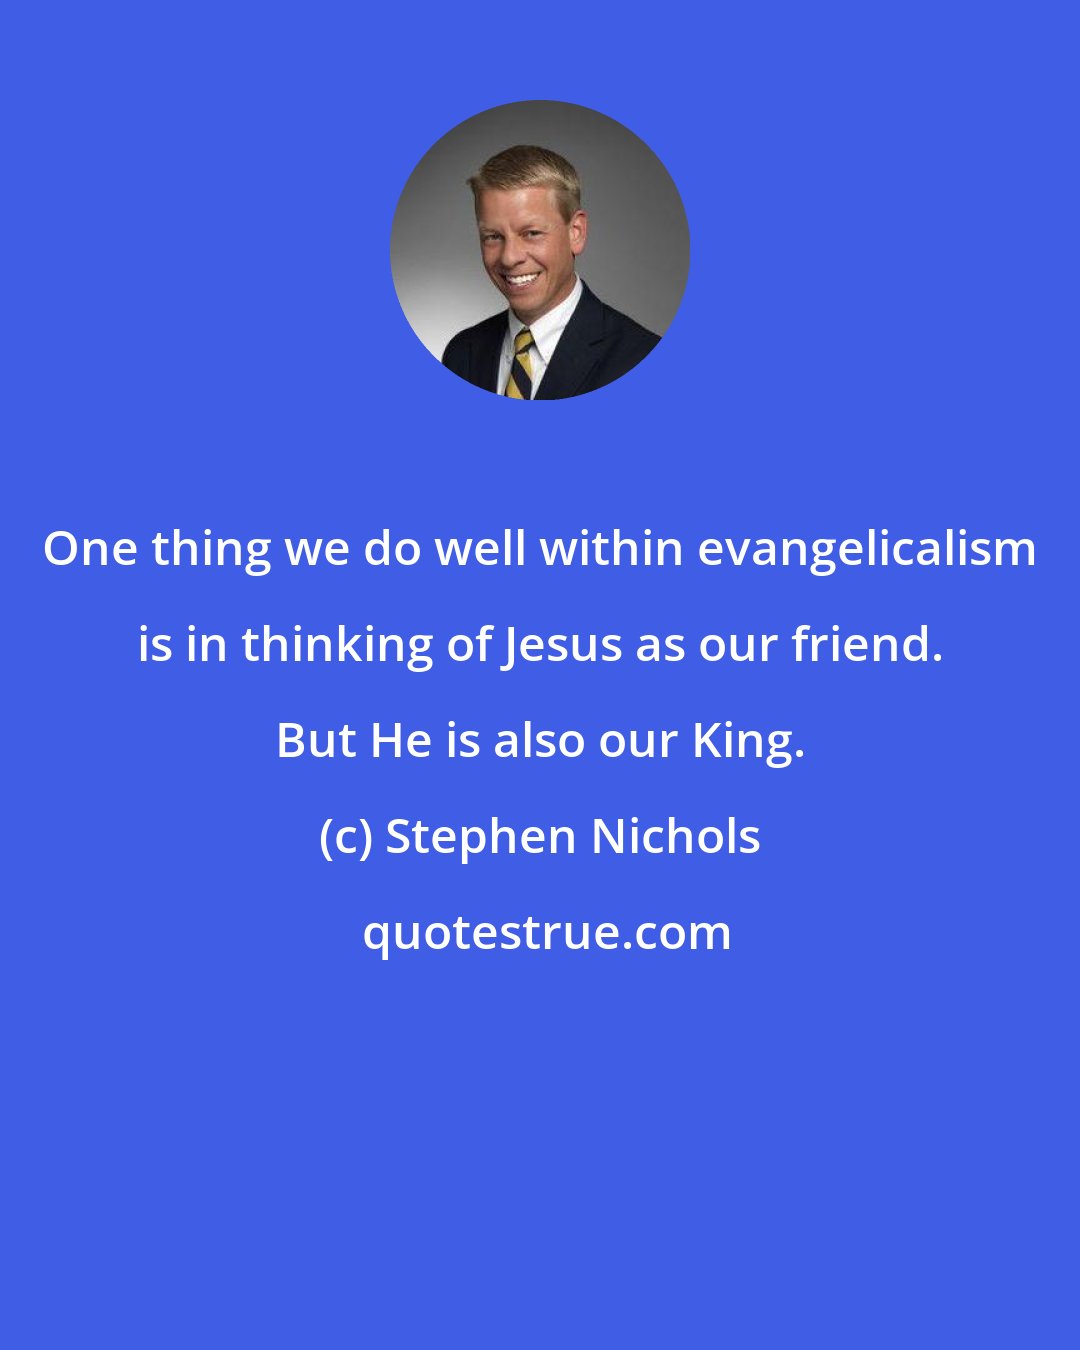 Stephen Nichols: One thing we do well within evangelicalism is in thinking of Jesus as our friend. But He is also our King.